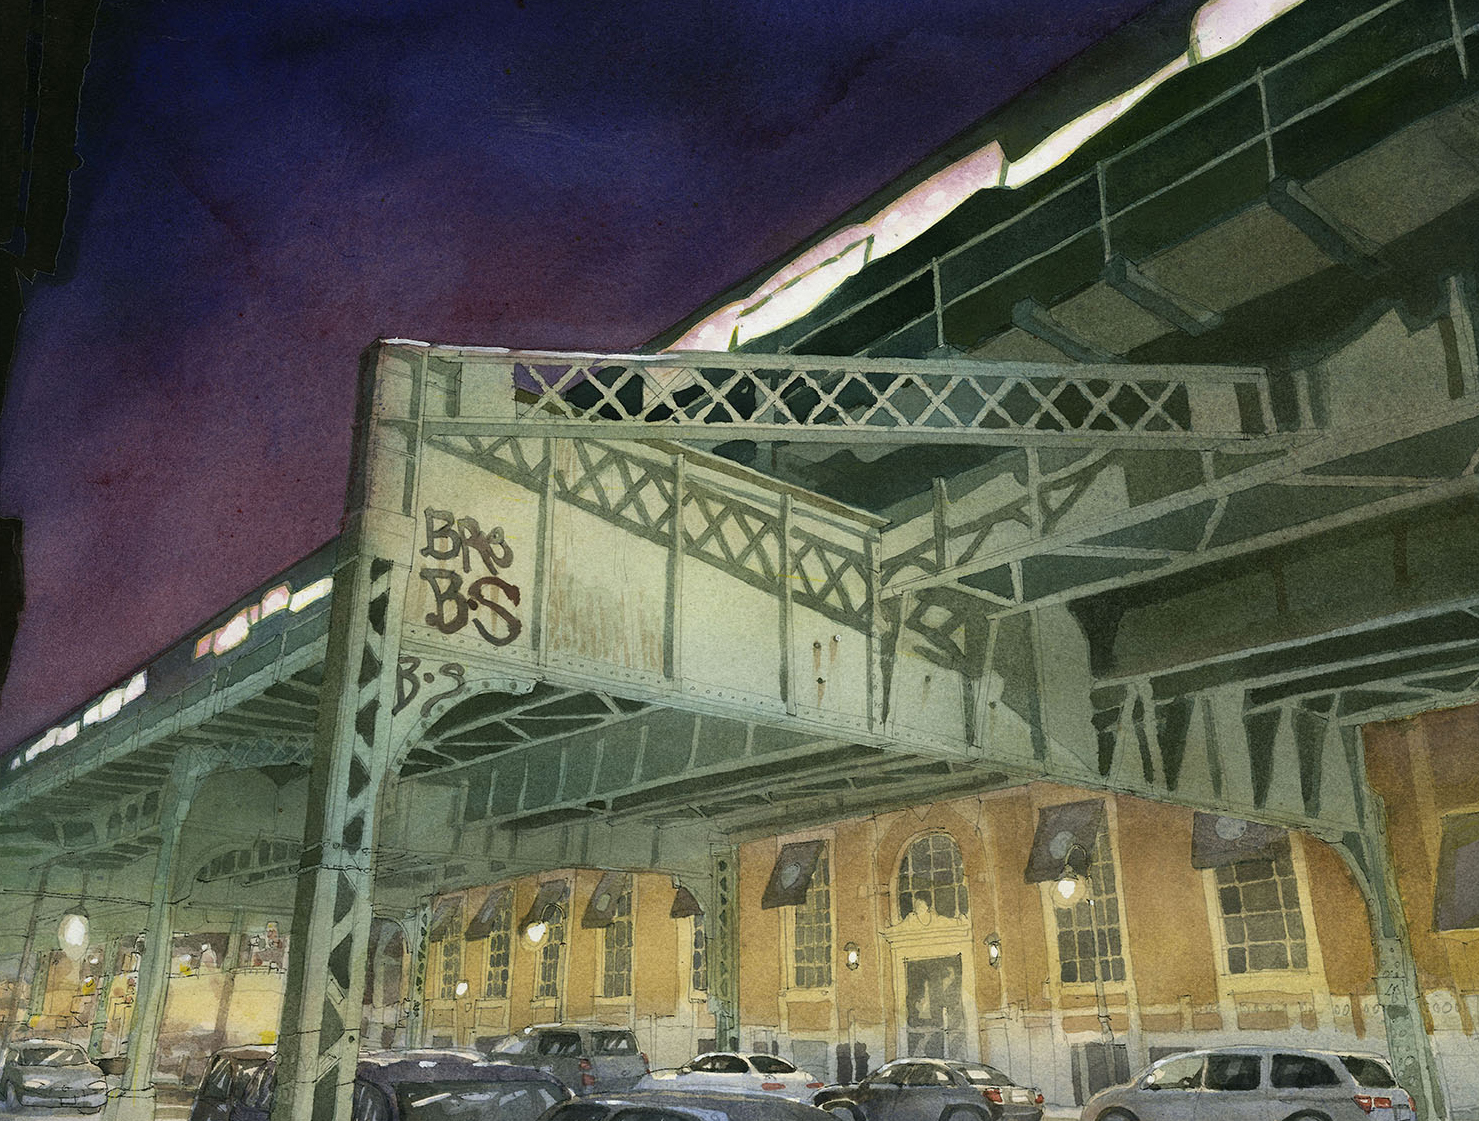 Greenpoint Terminal Warehouse, watercolor by Sven Johnson - Greenpointers